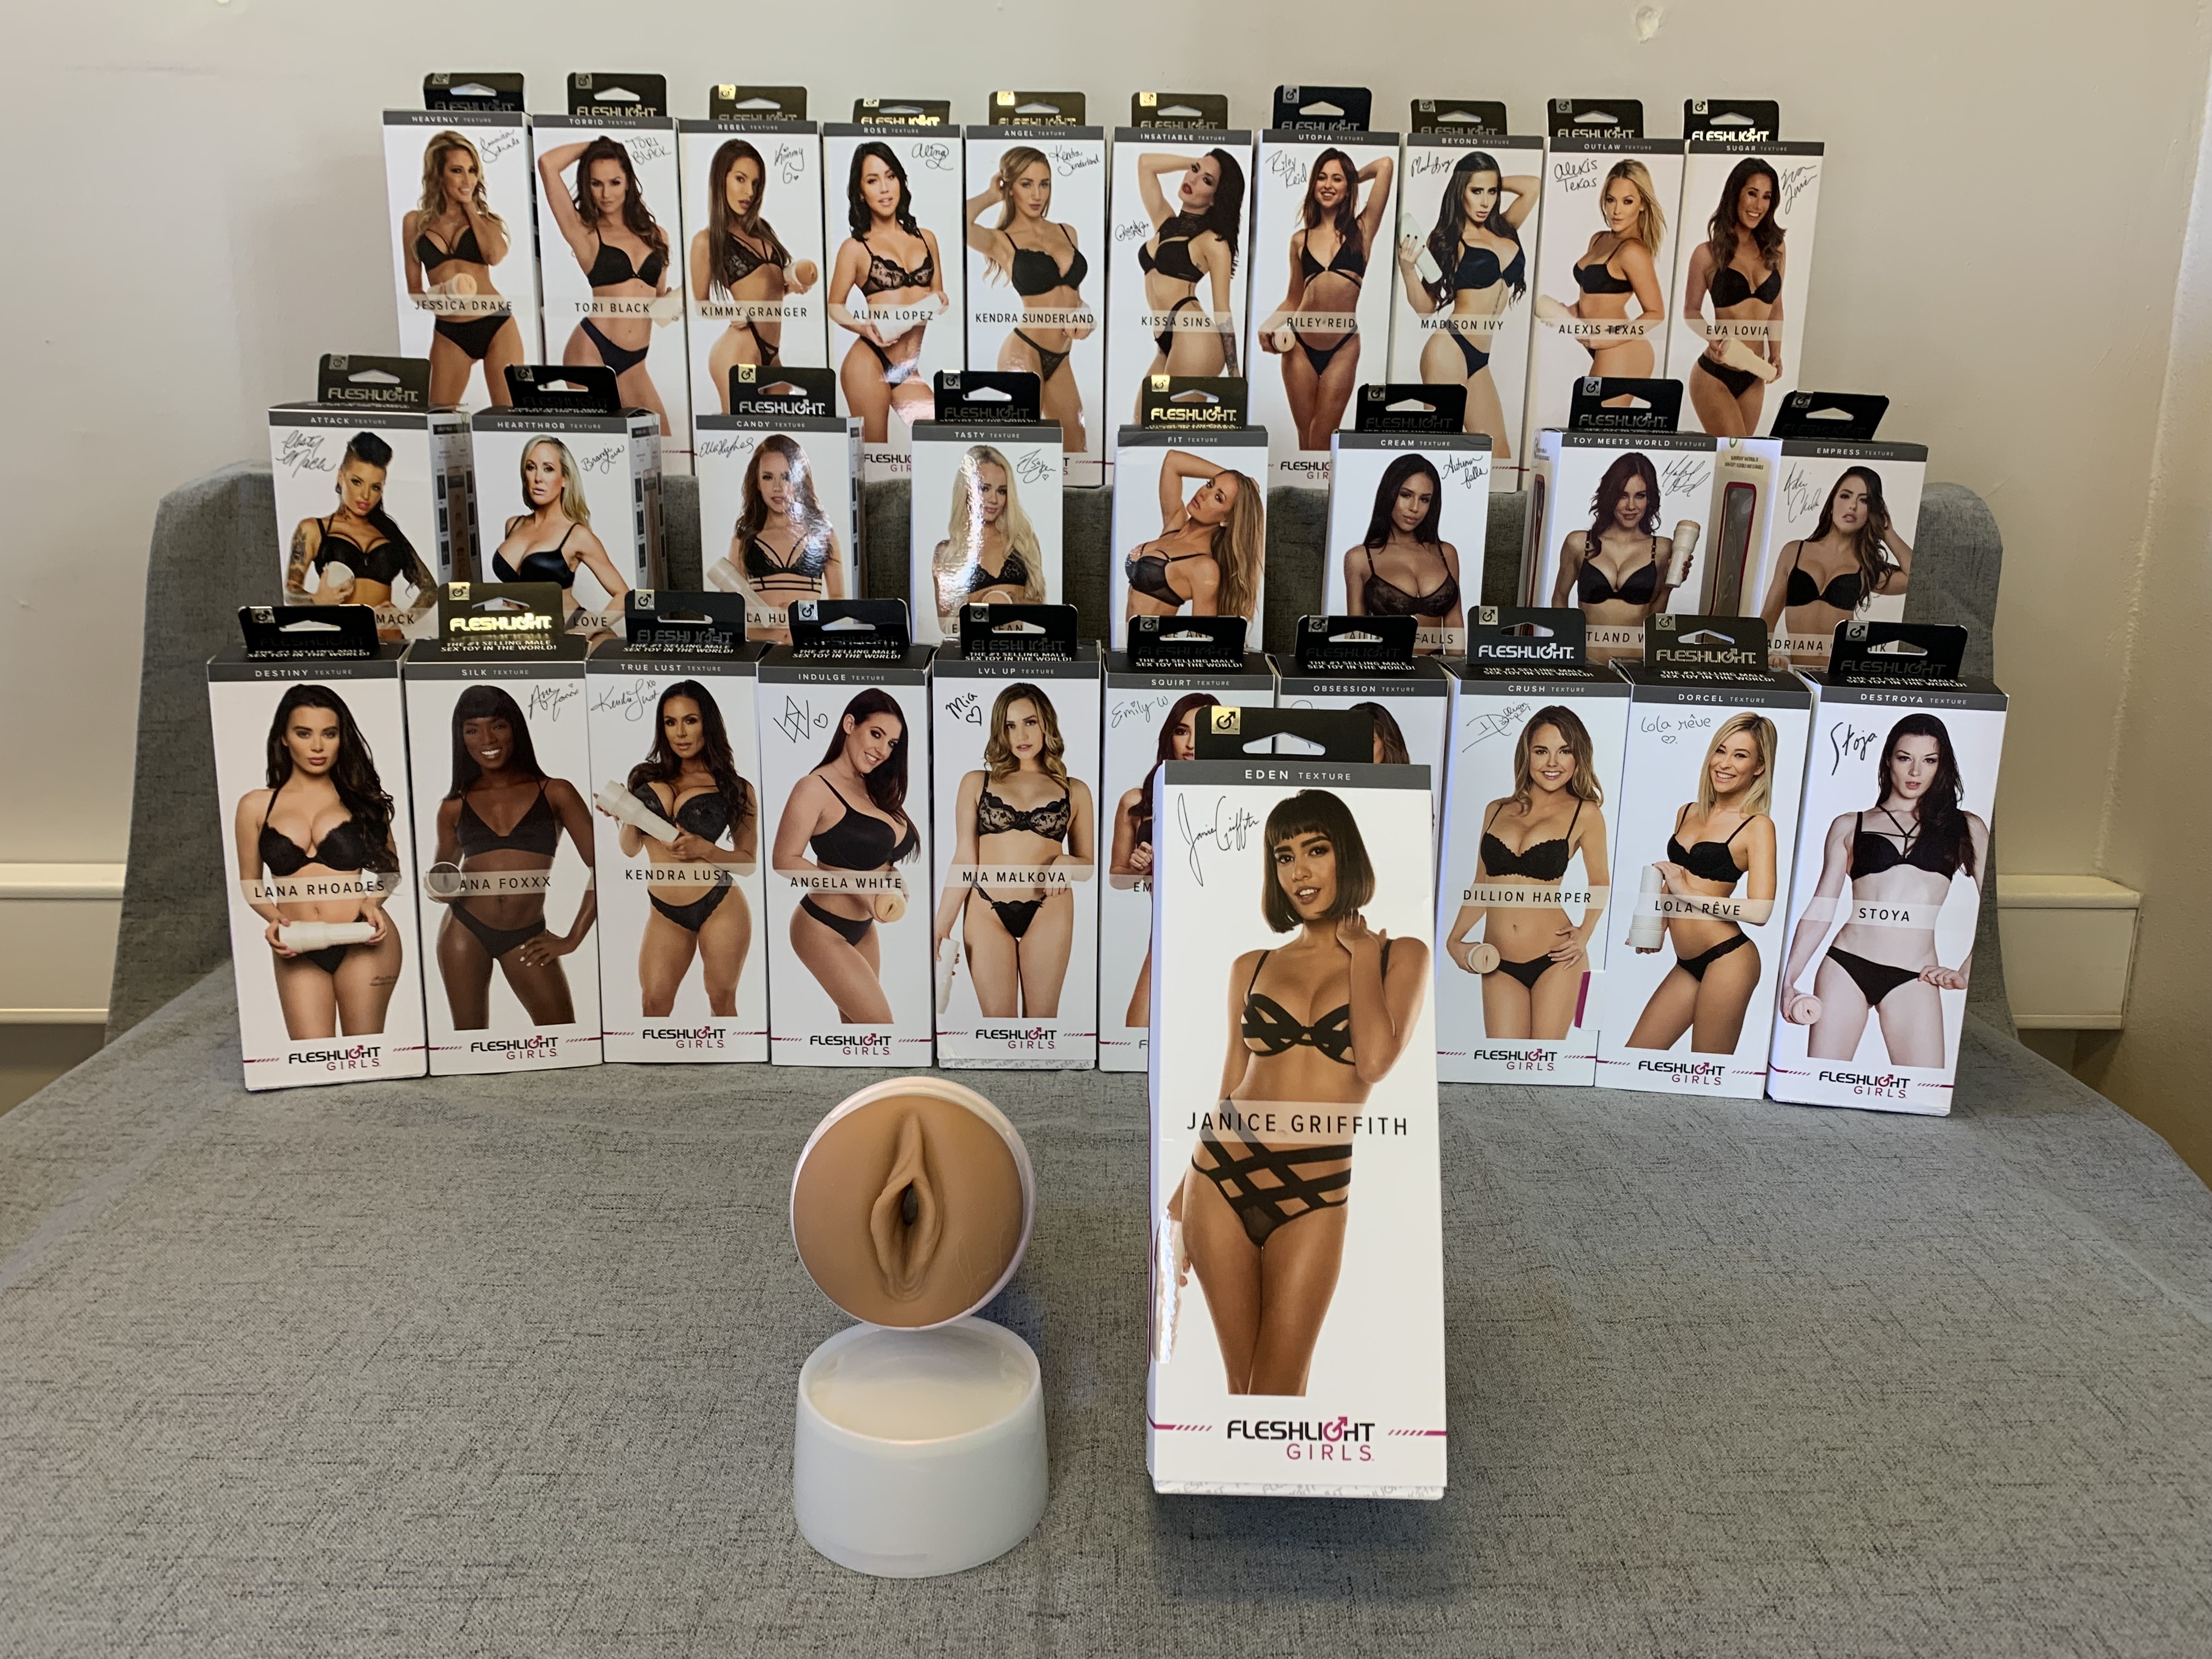 My Personal Experiences with Janice Griffith Fleshlight Eden